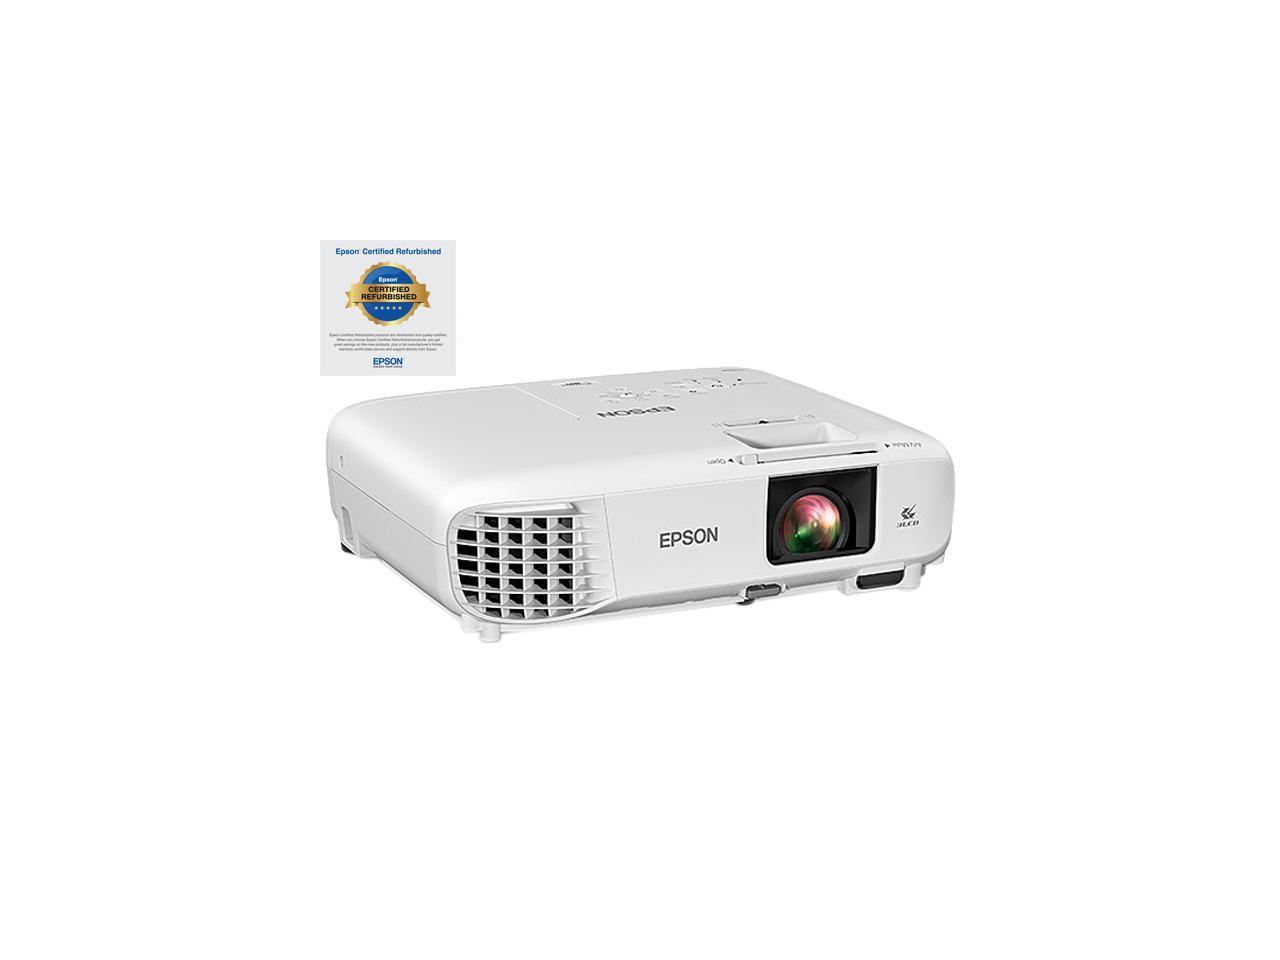 Epson Home Cinema 880 3LCD 1080p Projector, Built-in Speaker, 16,000:1 Contrast Ratio, HDMI - image 1 of 5